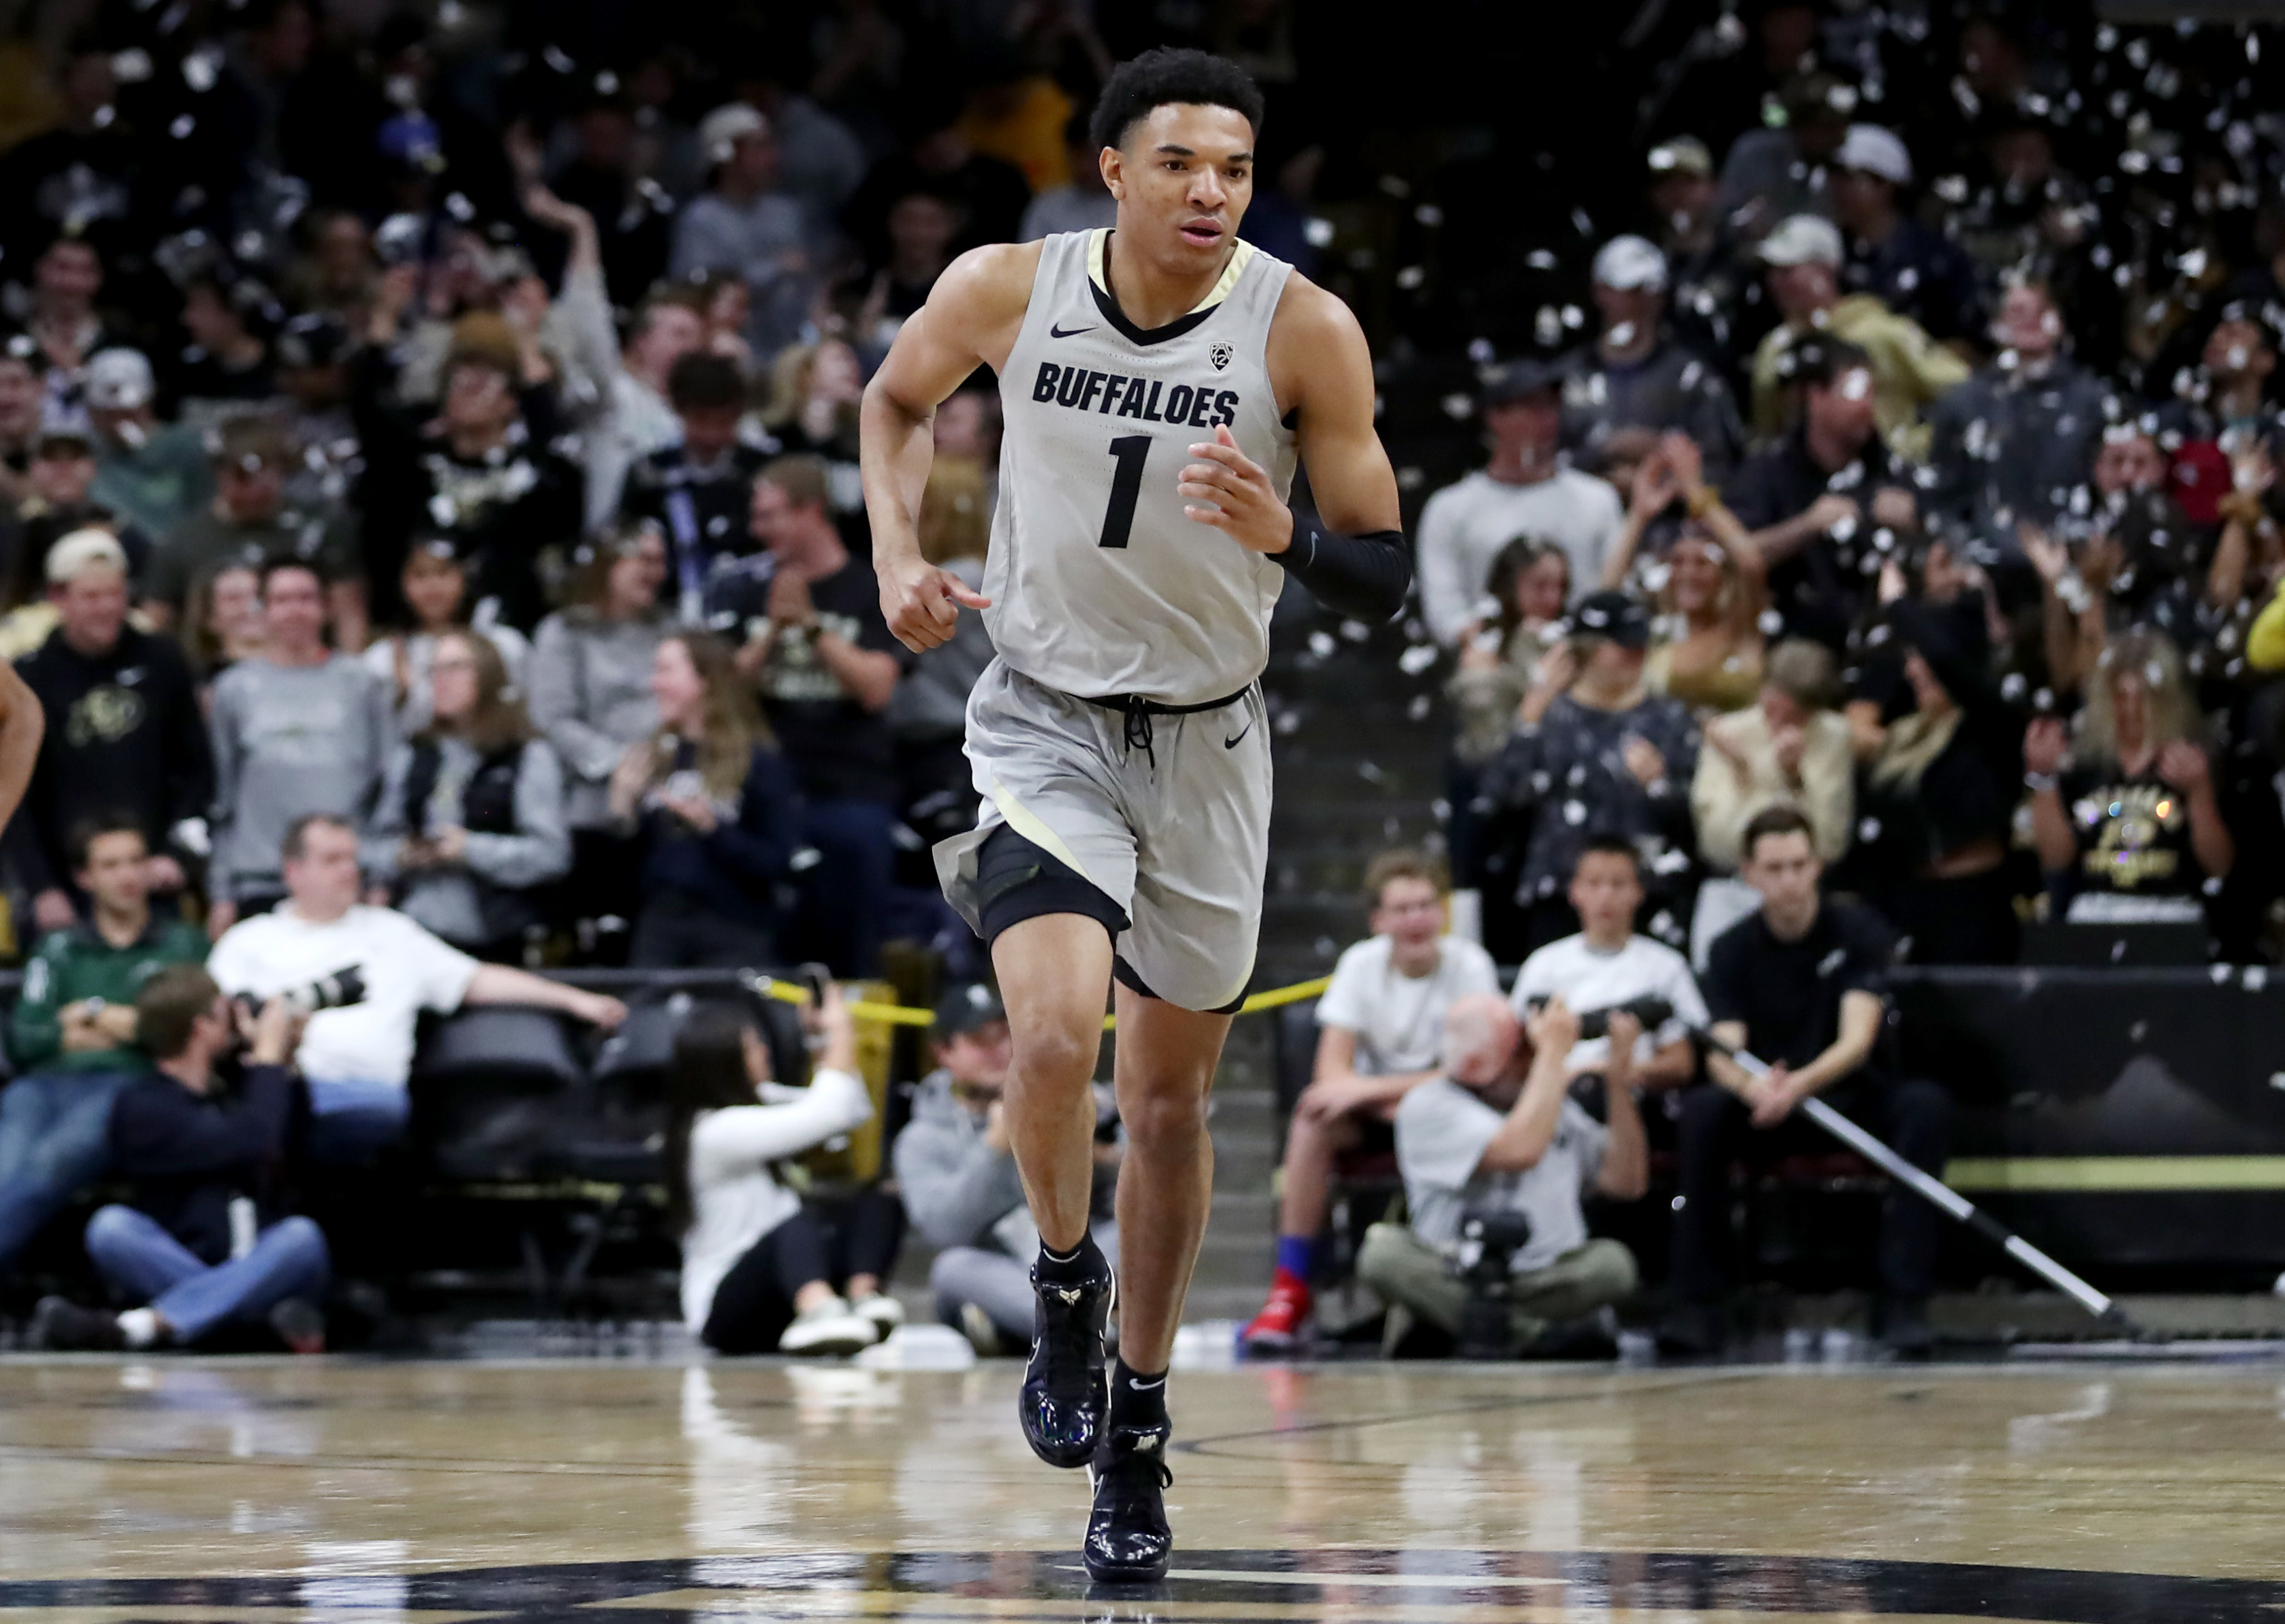 Denver Nuggets: Is Tyler Bey a realistic option in the 2020 NBA Draft?